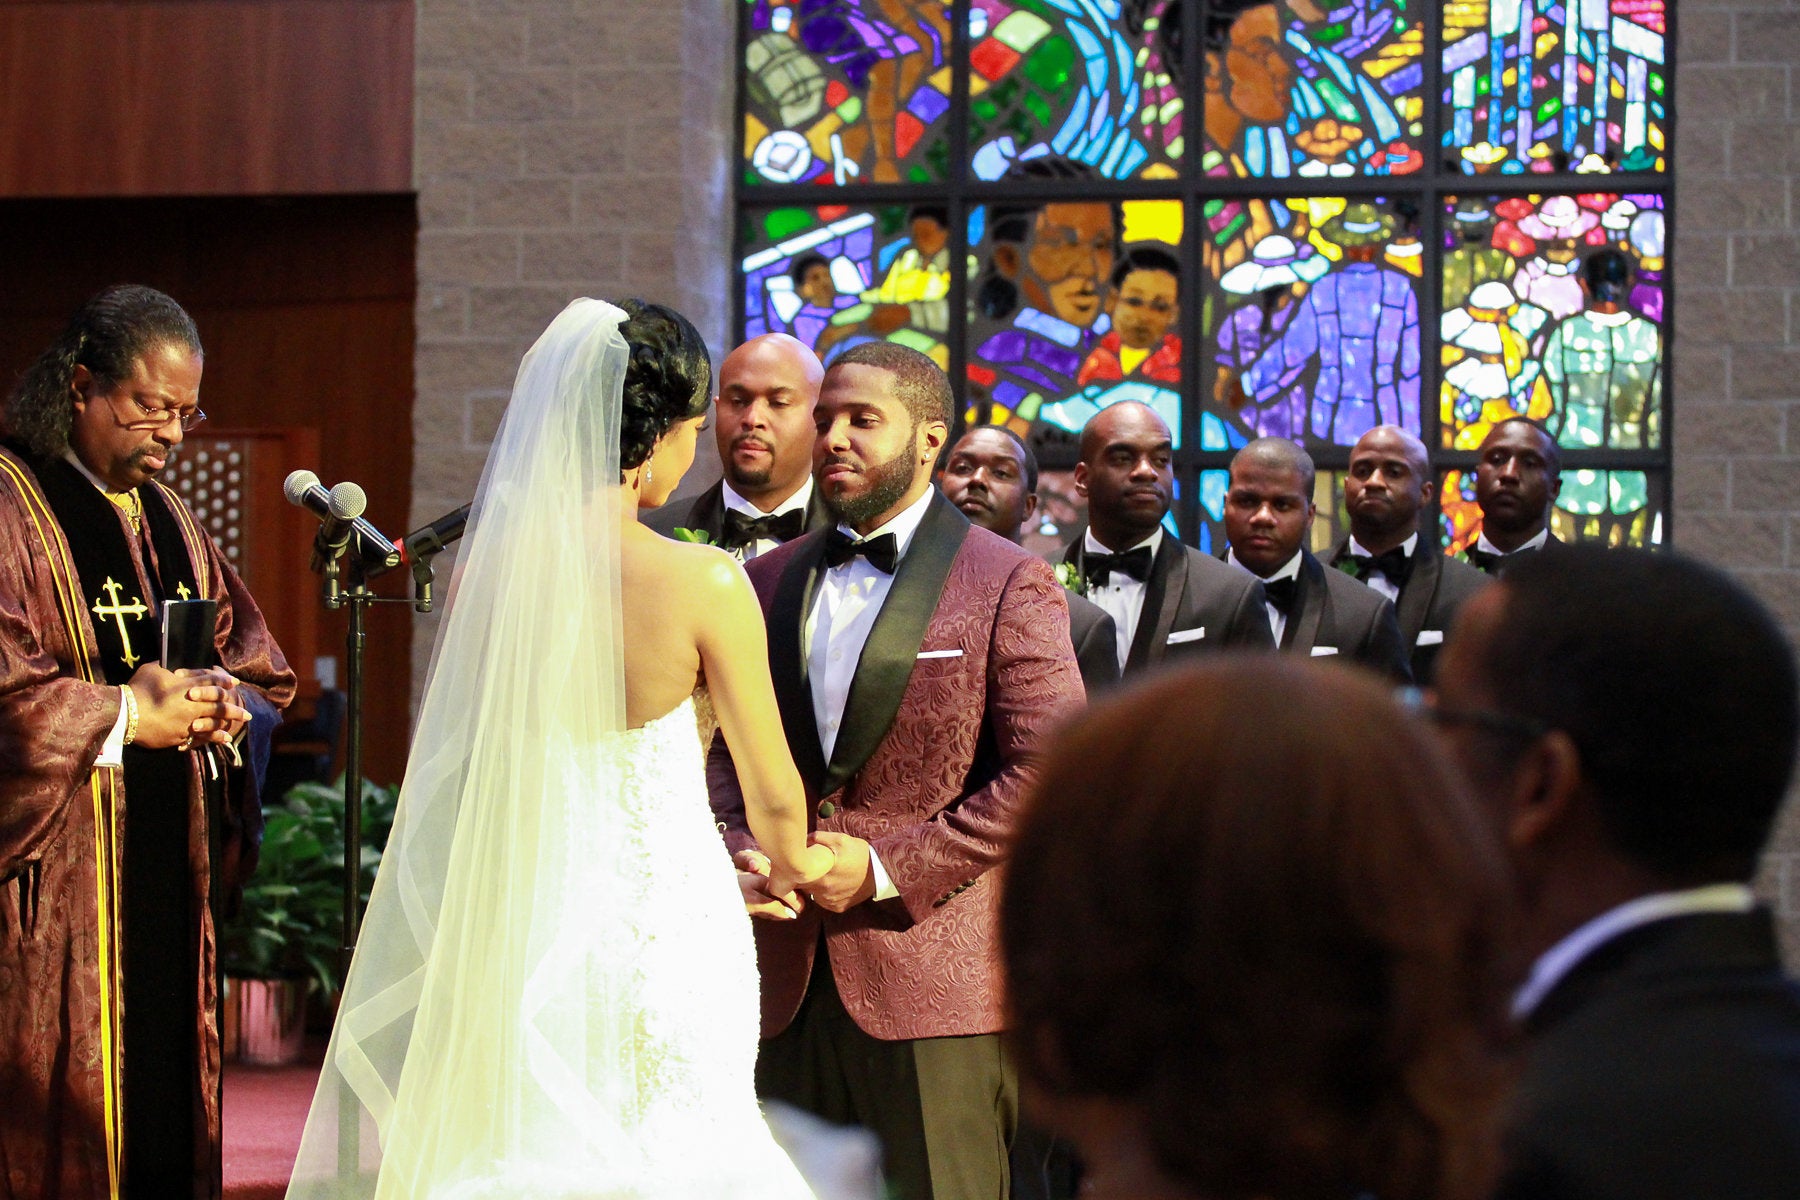 Bridal Bliss: Kwame and Michele's Sweet Charlotte Wedding Photos Are Full Of Love
